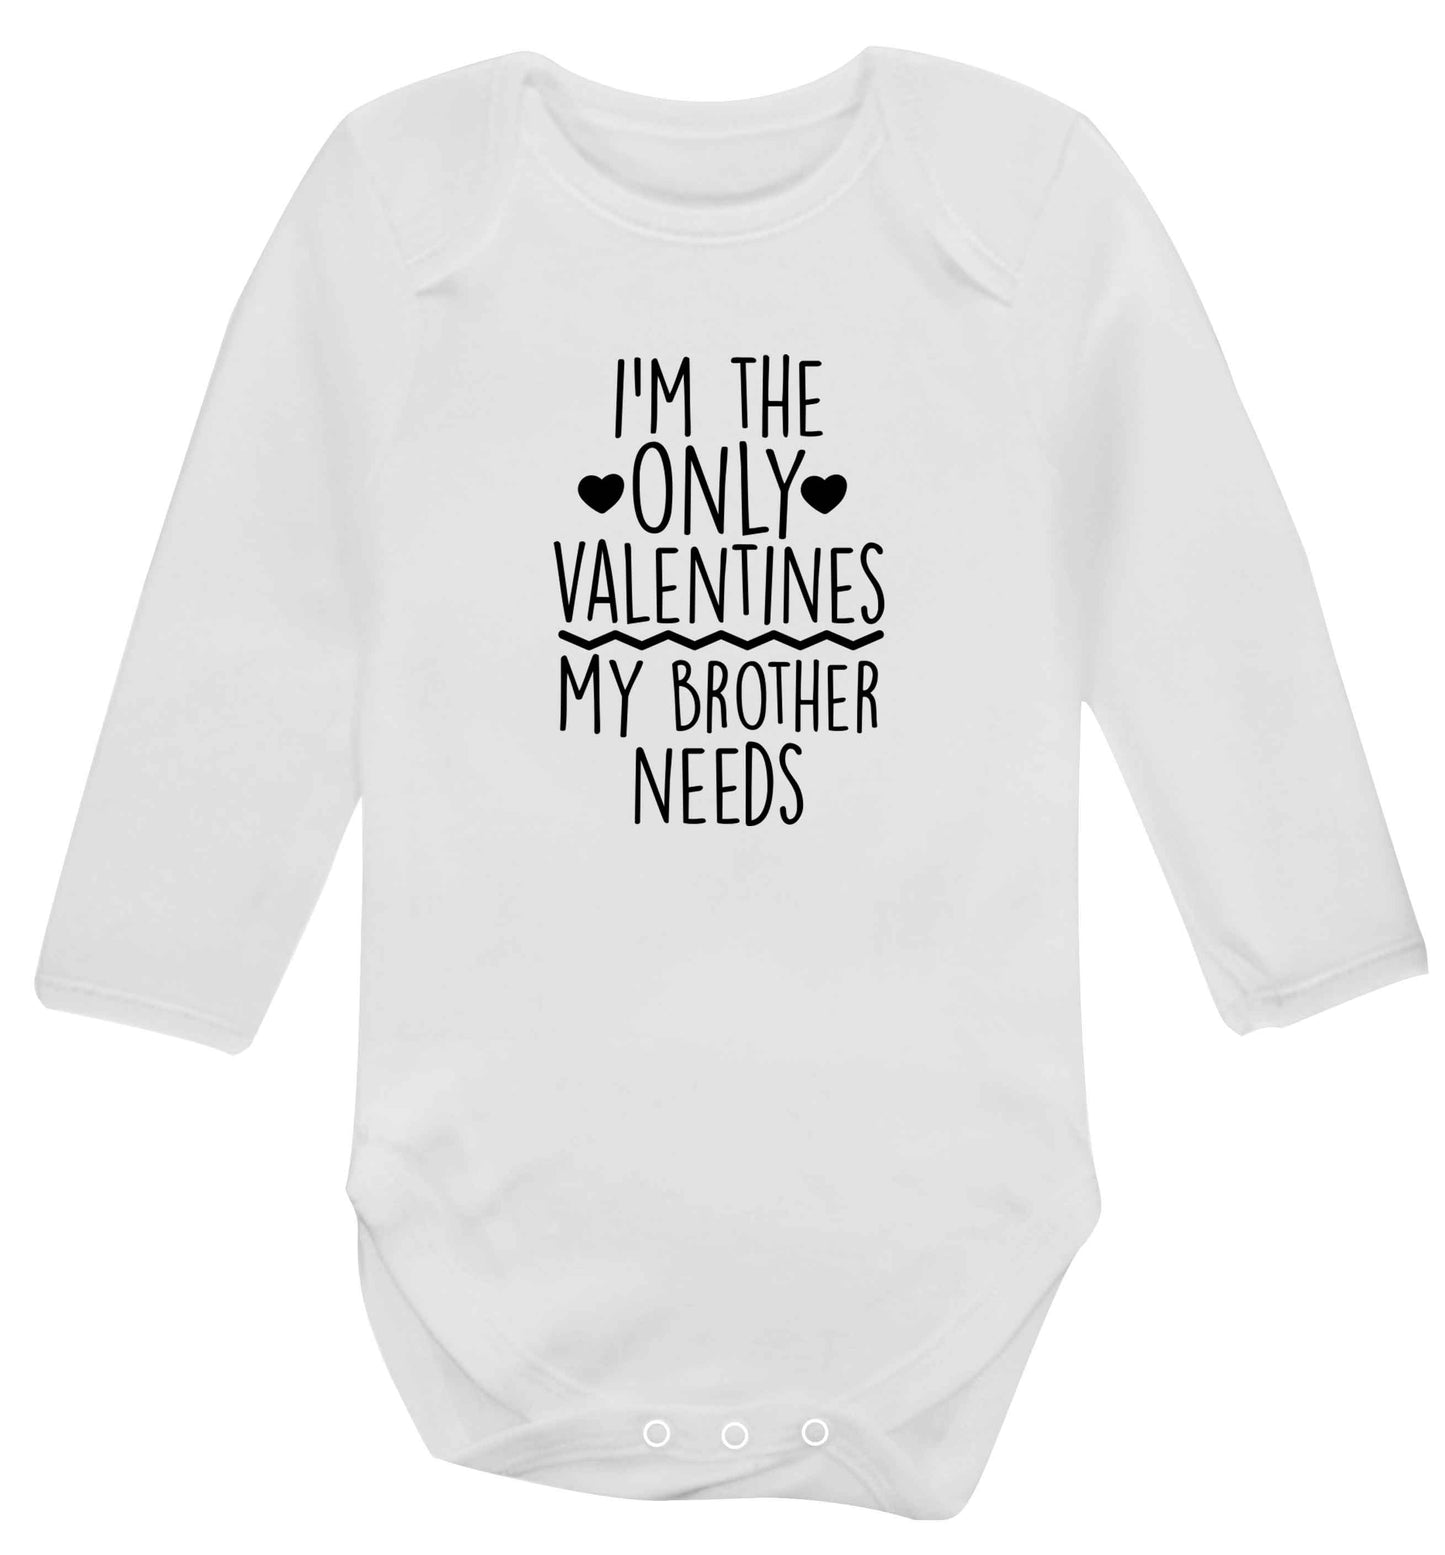 I'm the only valentines my brother needs baby vest long sleeved white 6-12 months